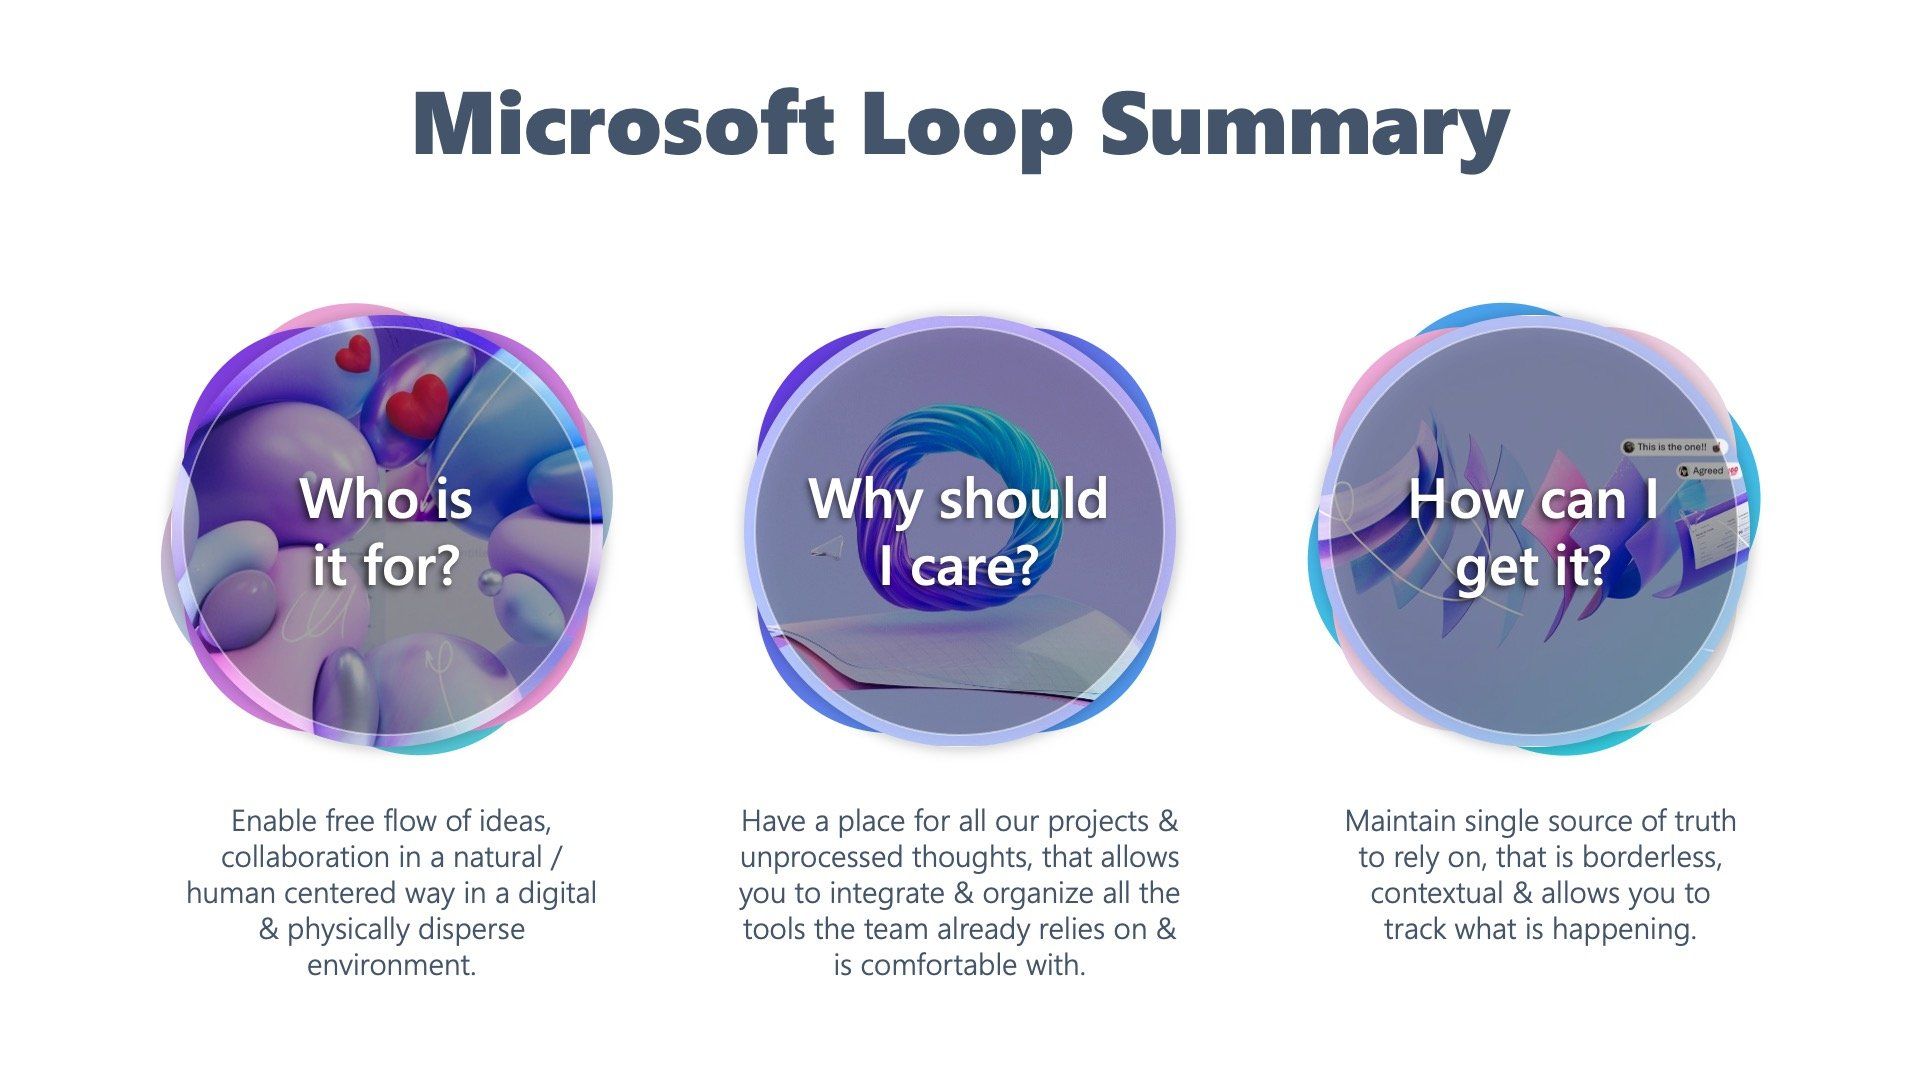 a microsoft loop summary is shown on a white background .